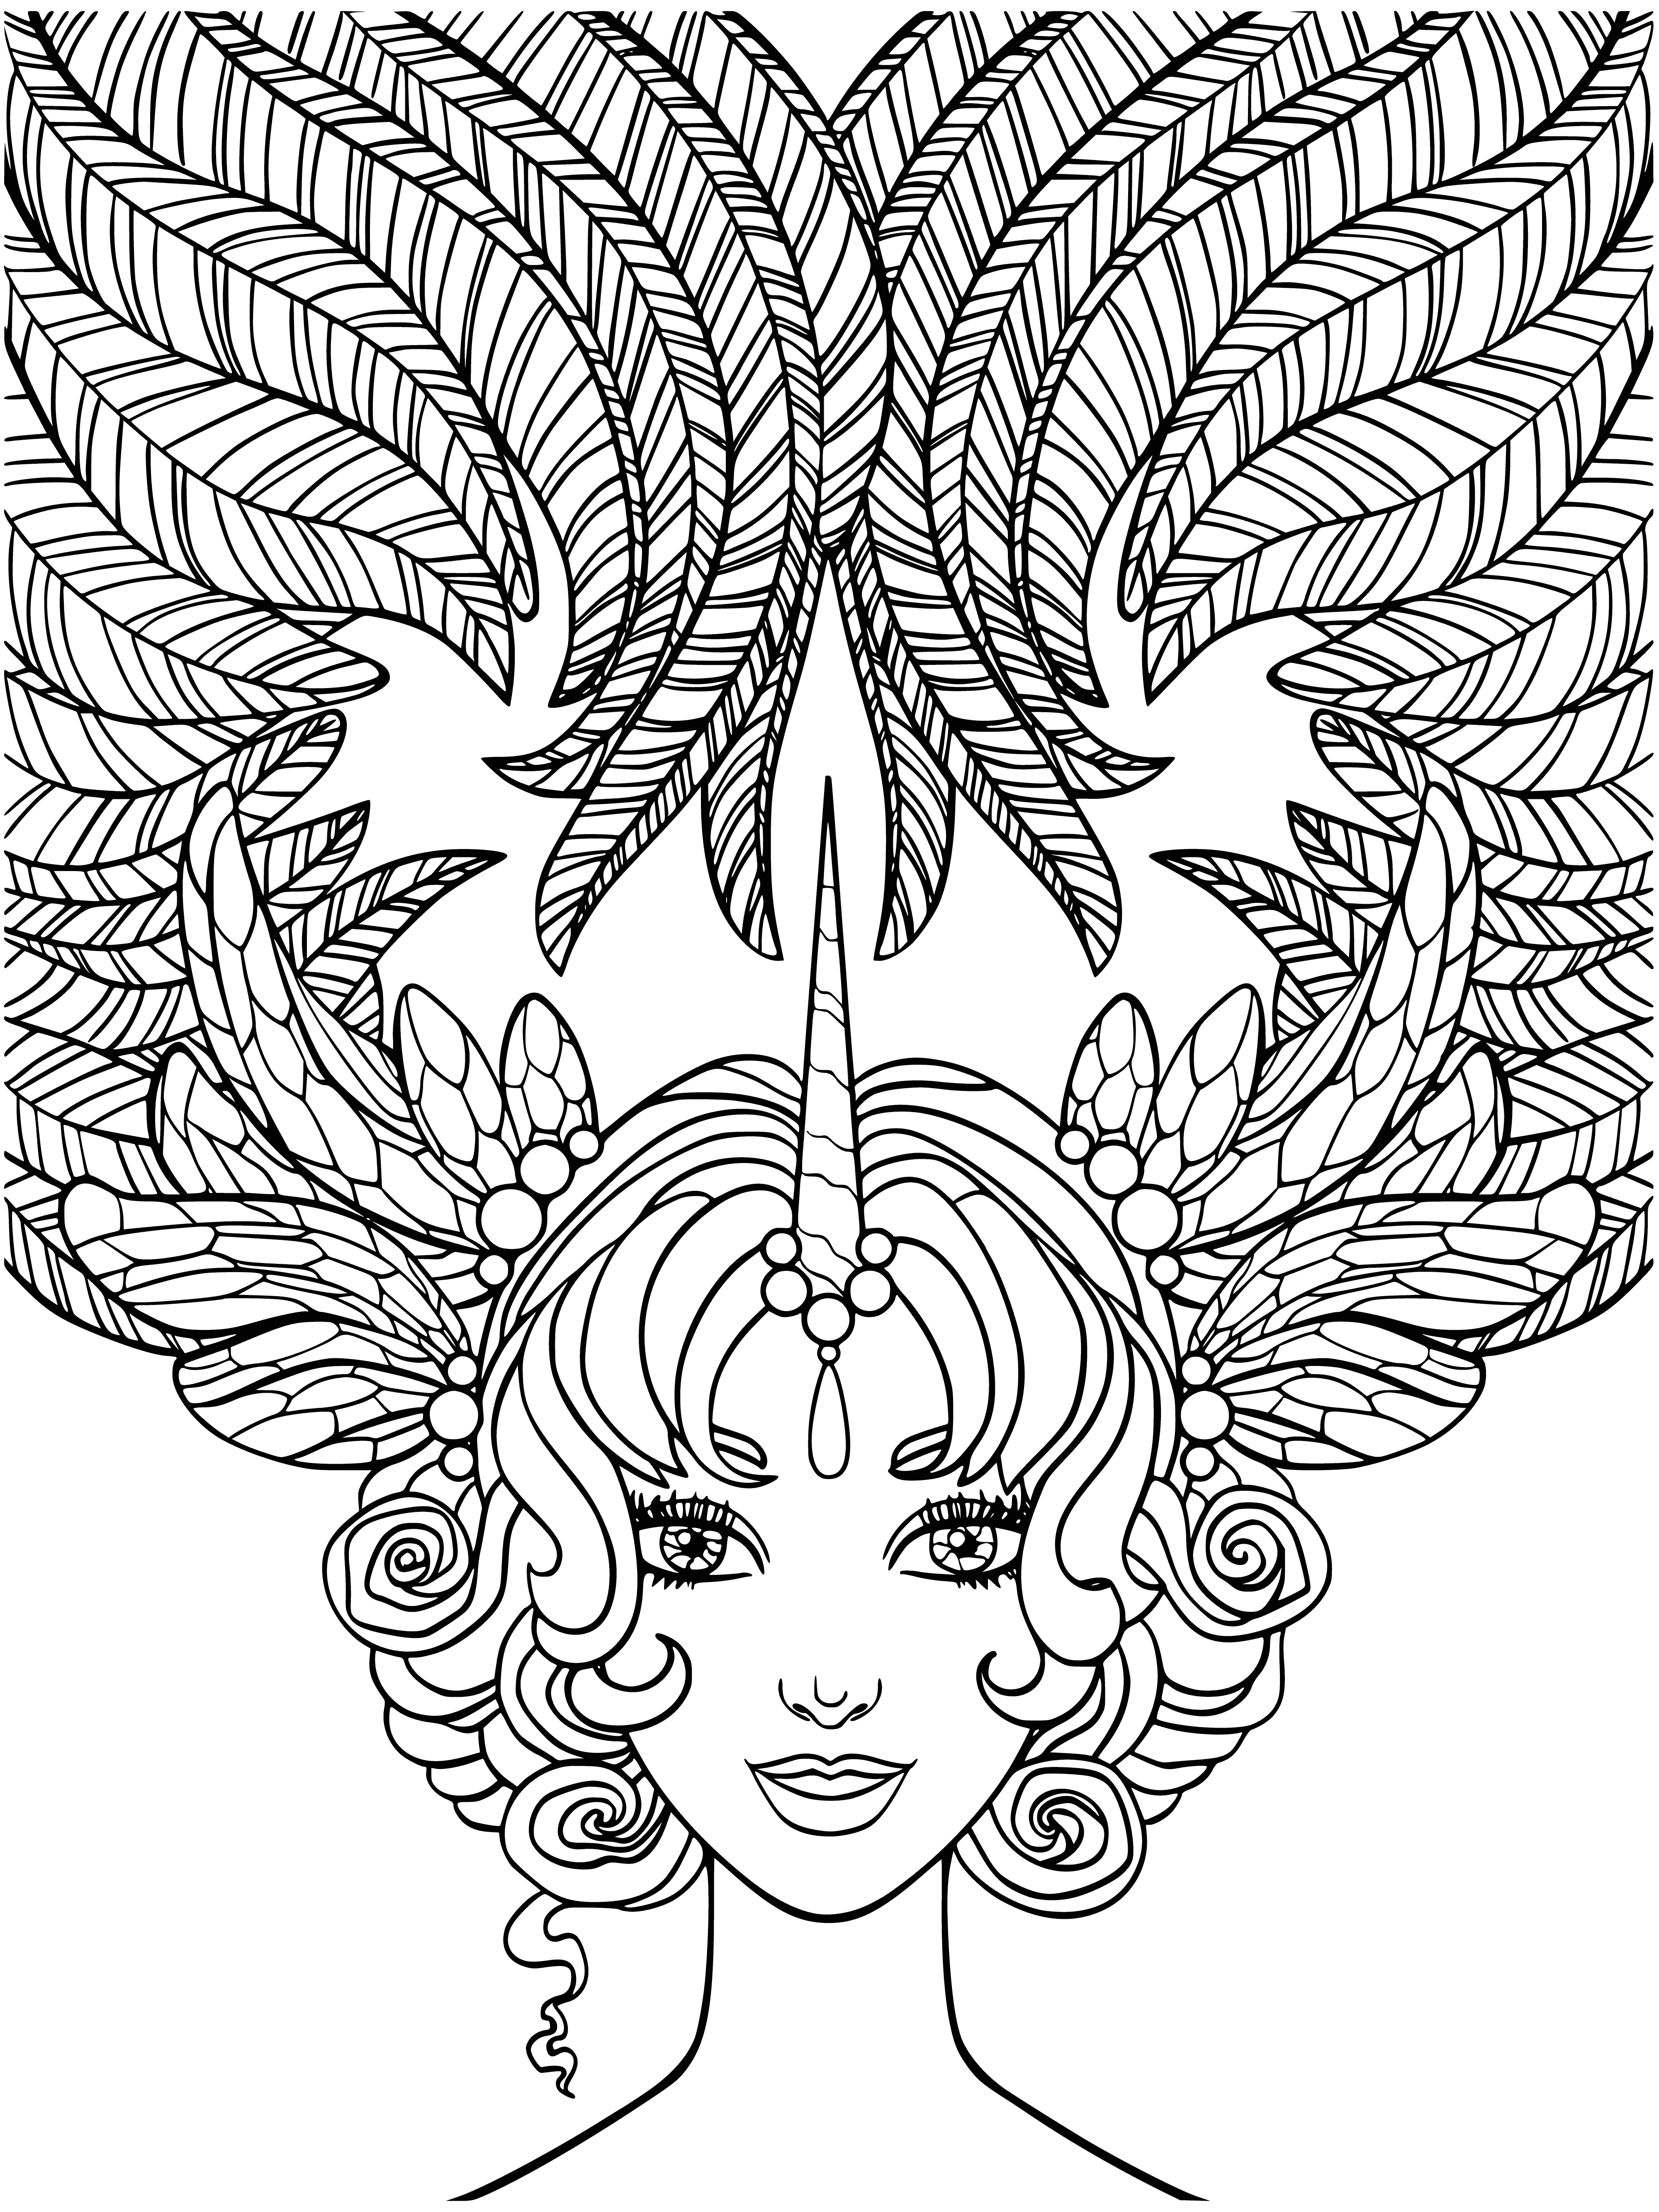 coloring page: Girl holds reins of flying unicorn, its coat shining, horn long & spiraling. Both grinning, she looks very happy.